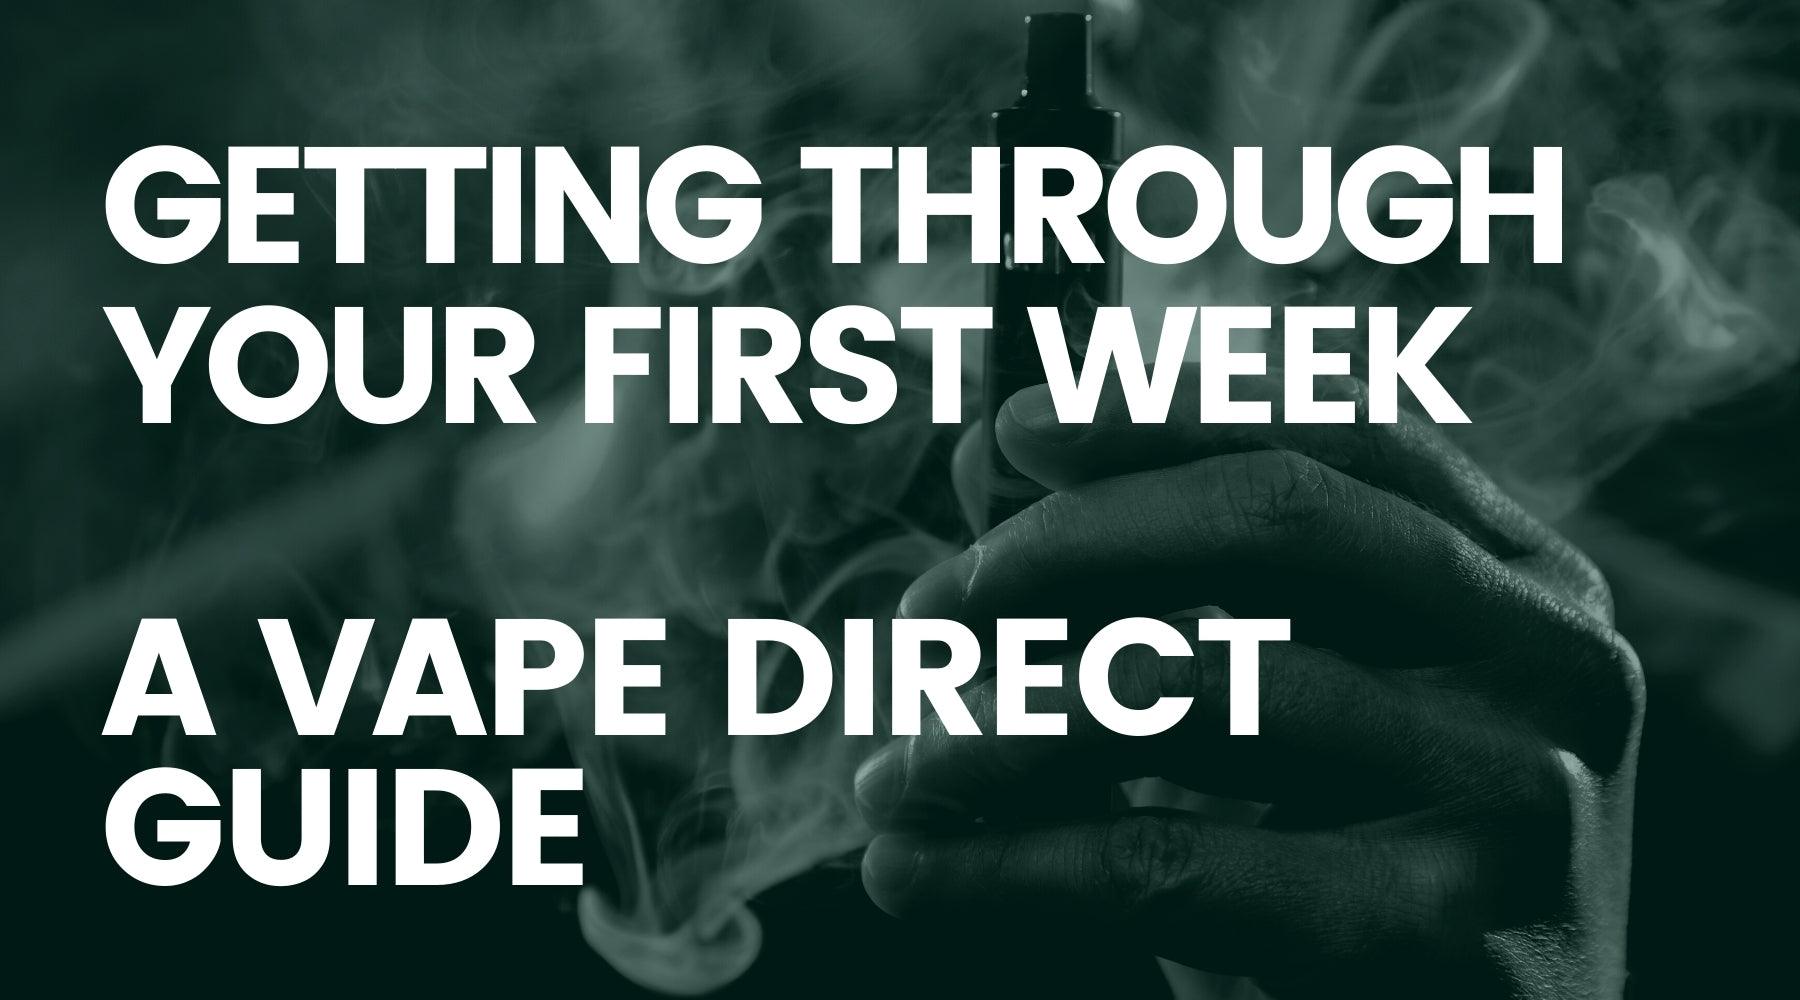 A VAPE DIRECT GUIDE TO HELPING YOU THROUGH YOUR FIRST WEEK OF VAPING, DO's and DONT'S and SOUND ADVICE FROM PEOPLE WHO HAVE QUIT USING VAPING FROM VAPE DIRECT IN STACEY BUSHES